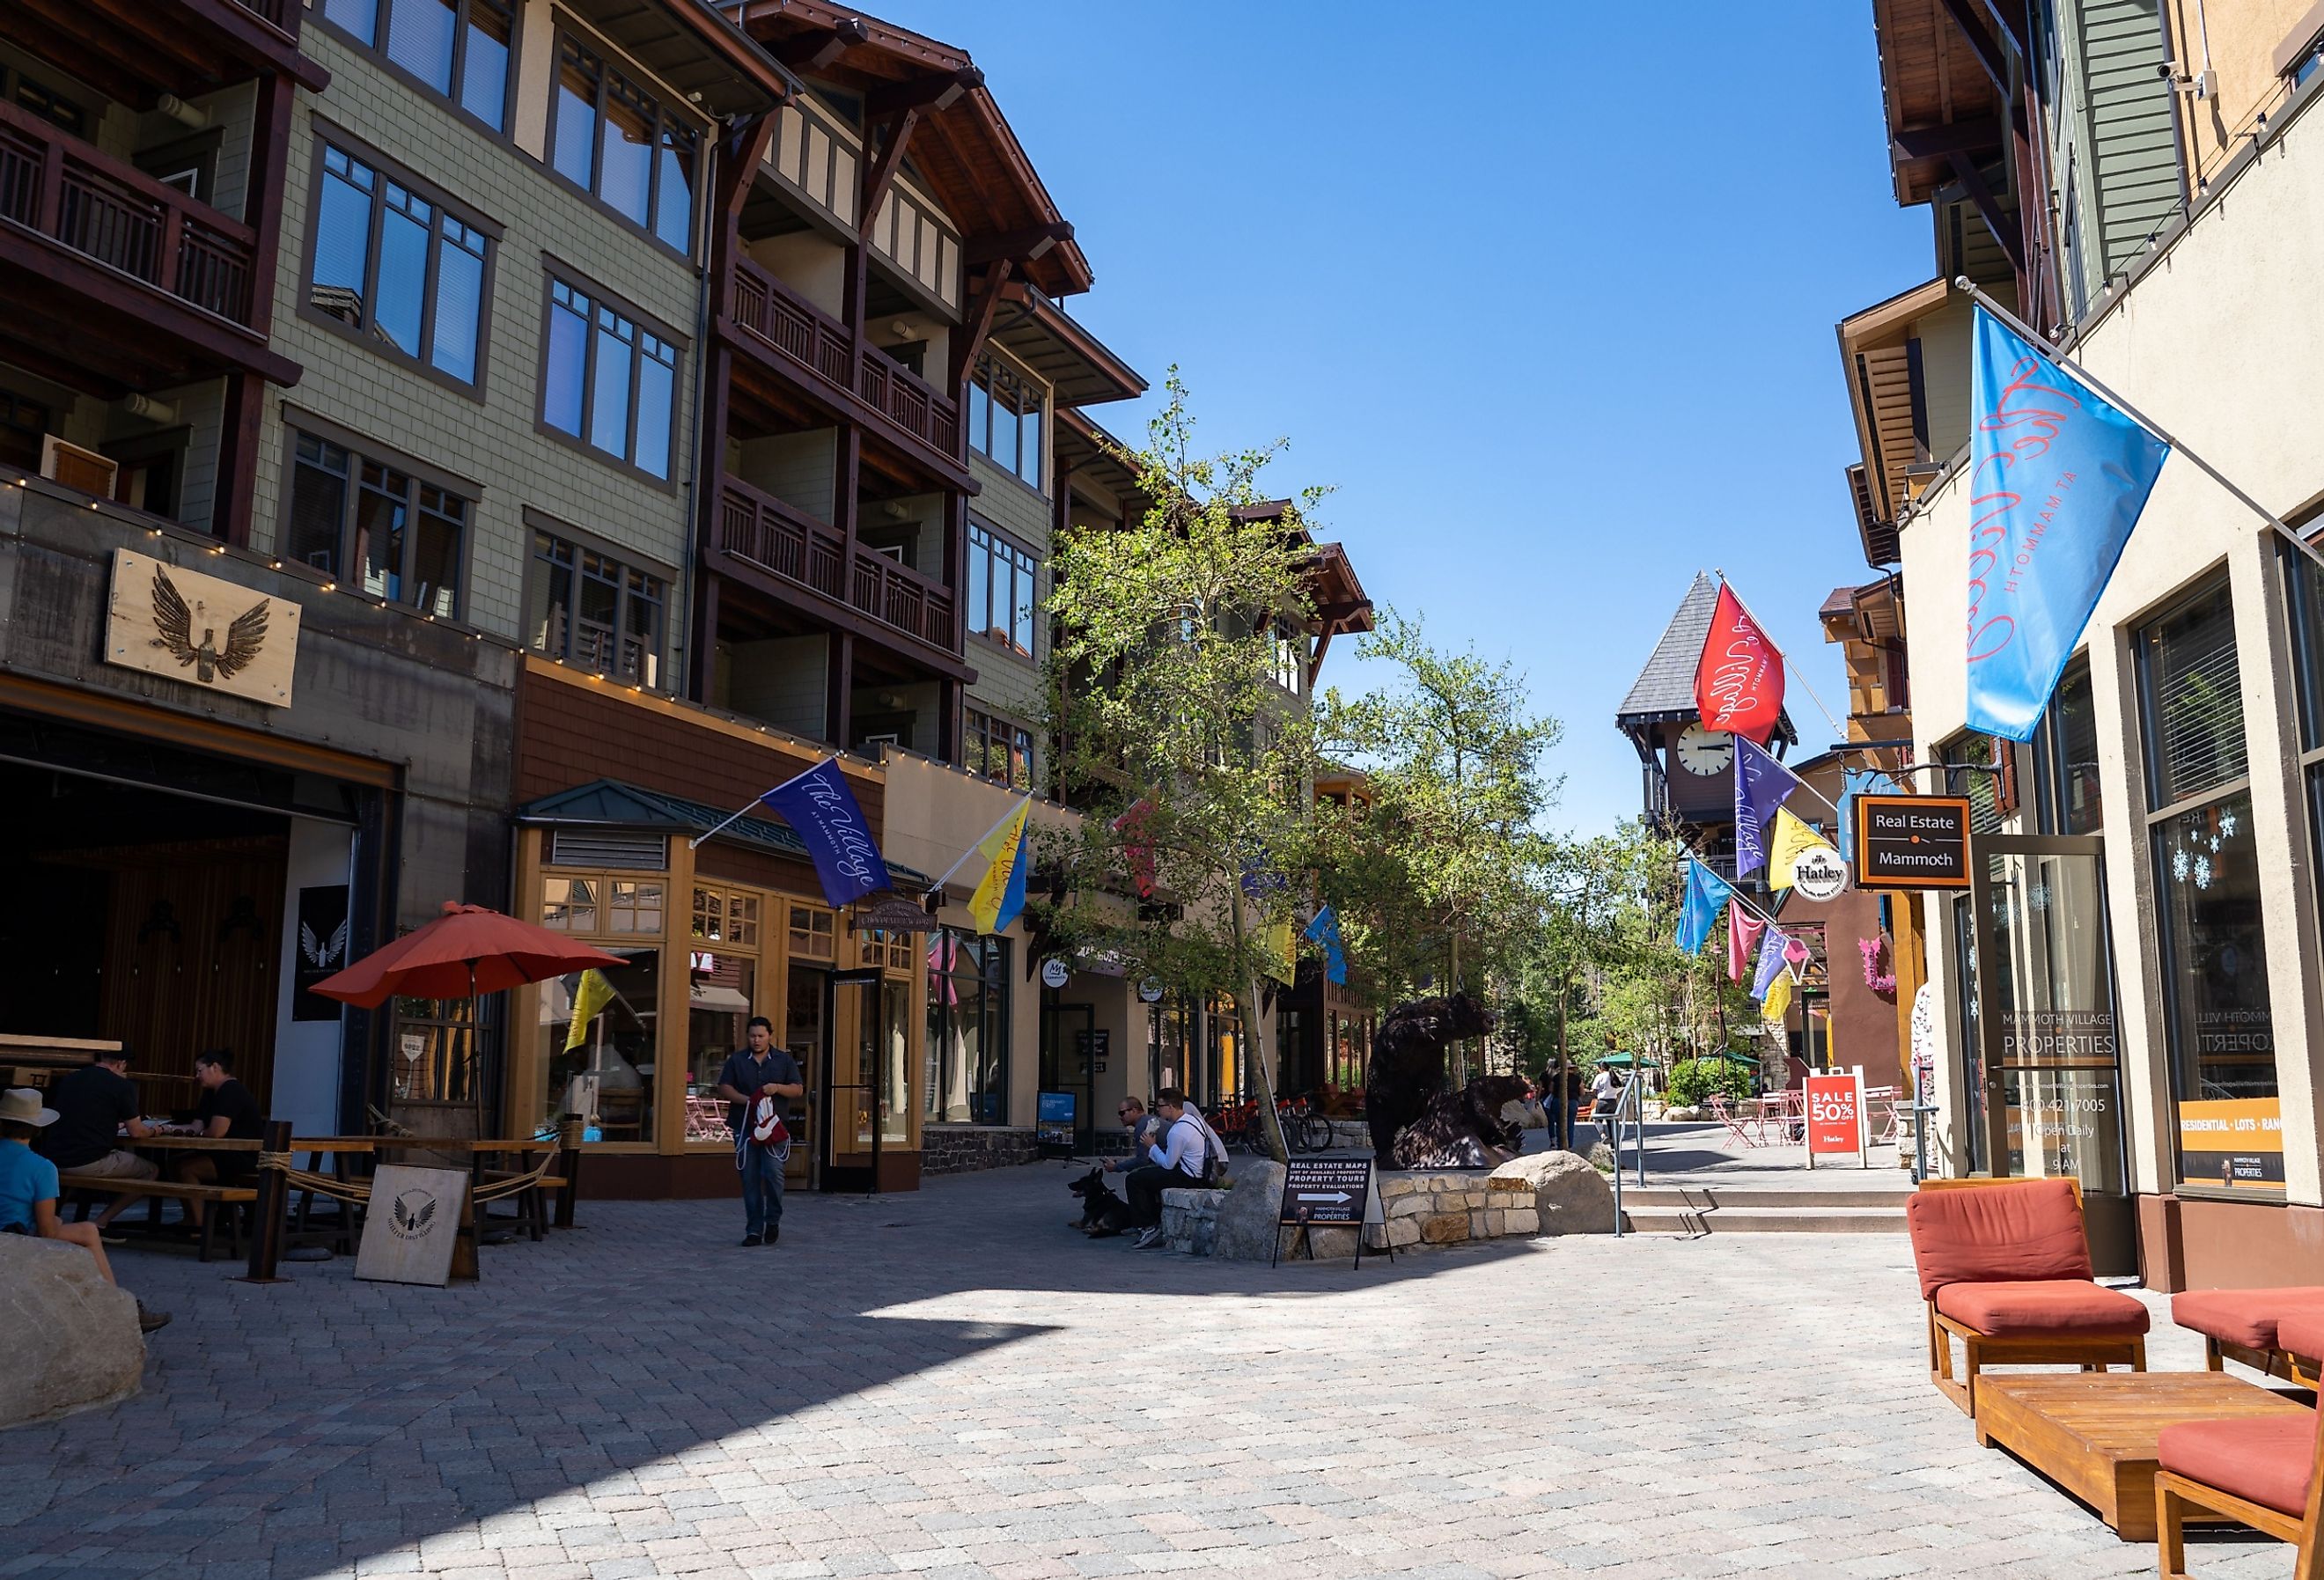 View of the Village at Mammoth Lakes, a pedestrian friendly shopping area with restaurants. Image credit melissamn via Shutterstock.